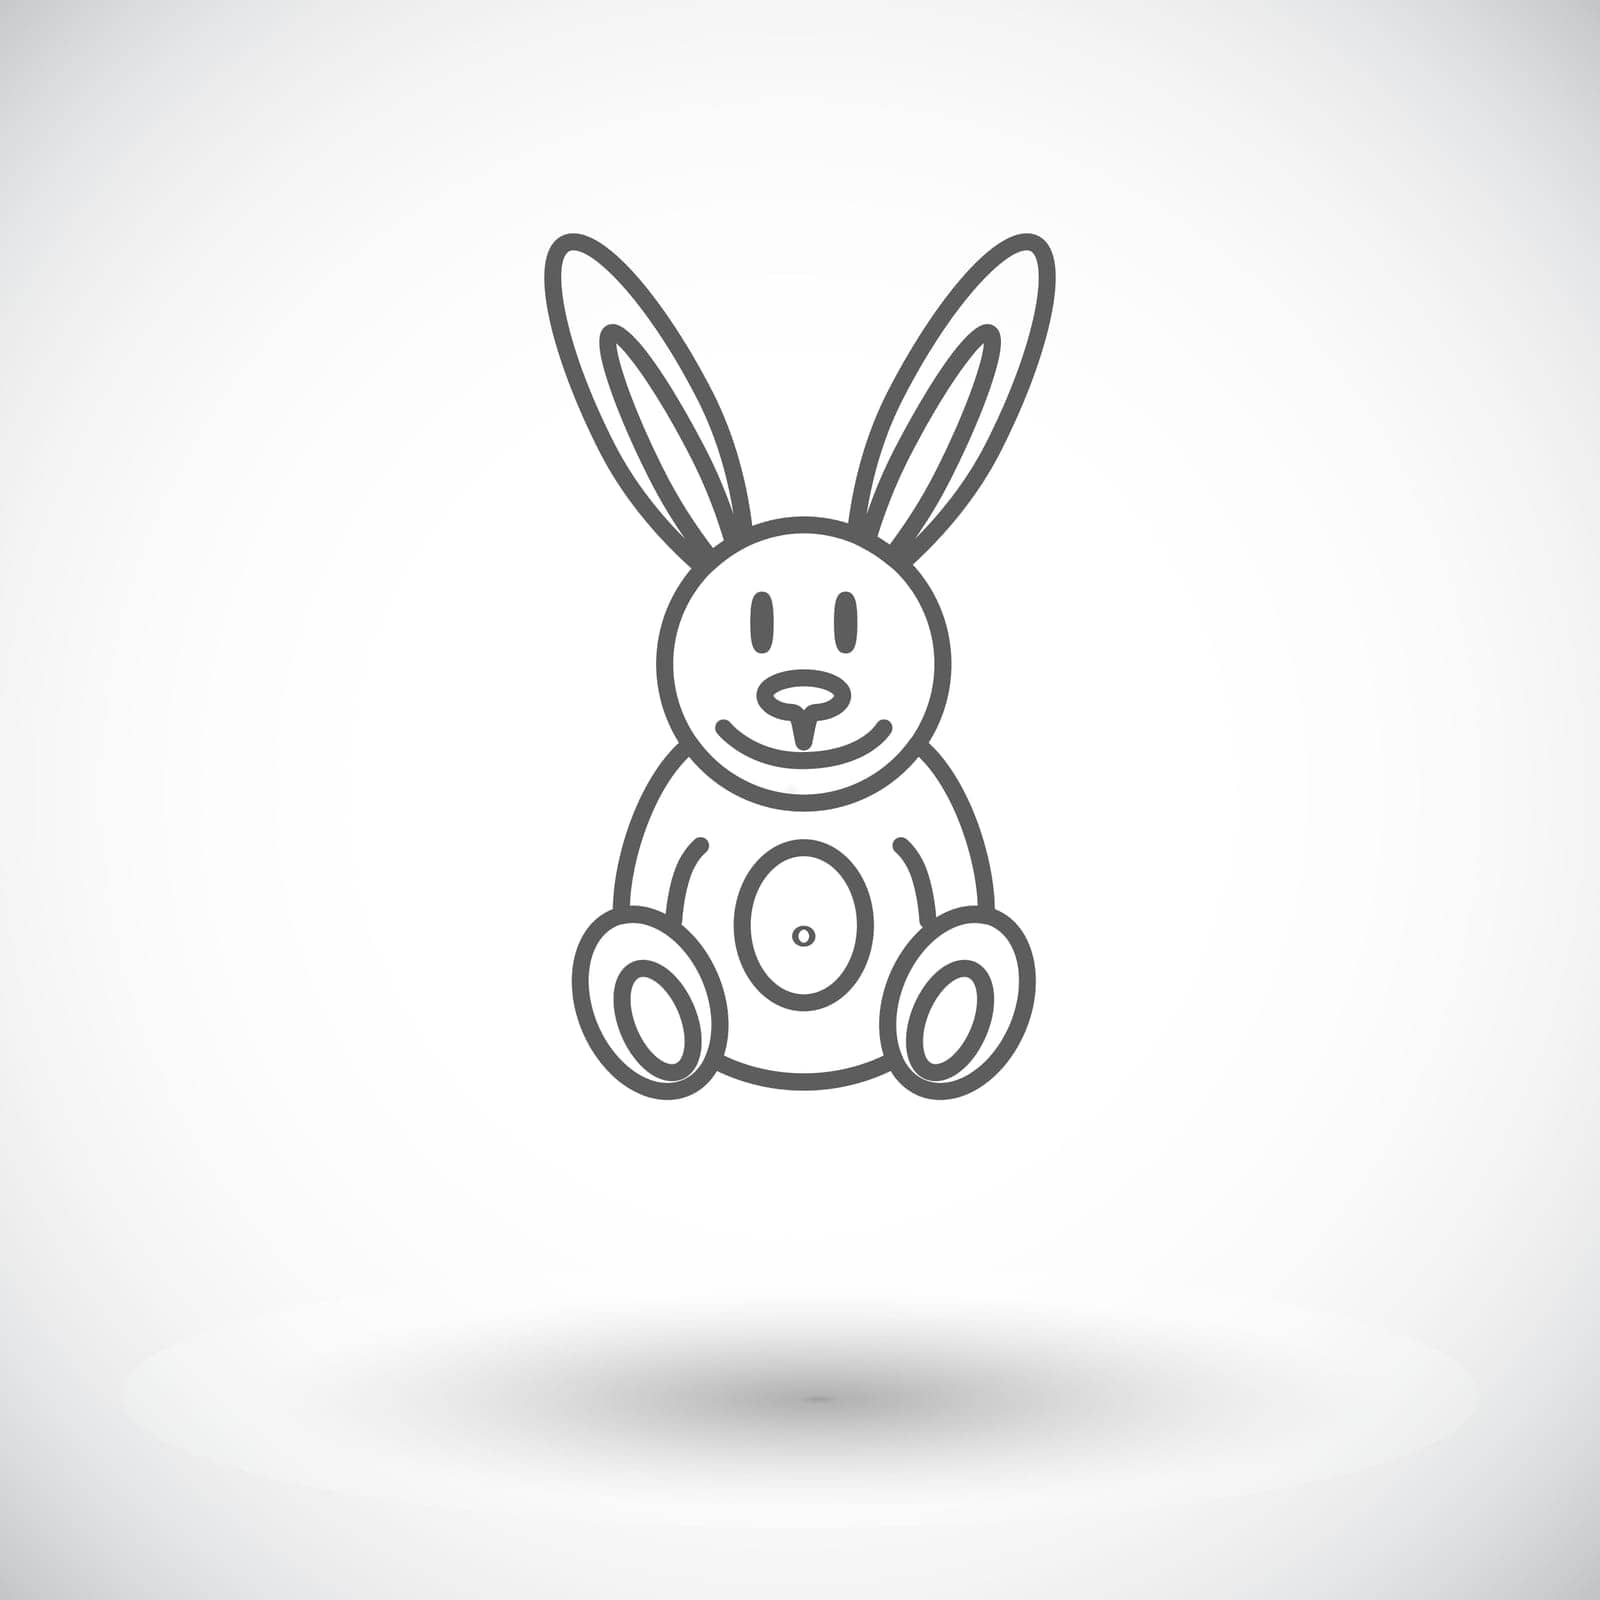 Rabbit icon. Thin line flat vector related icon for web and mobile applications. It can be used as - logo, pictogram, icon, infographic element. Vector Illustration.